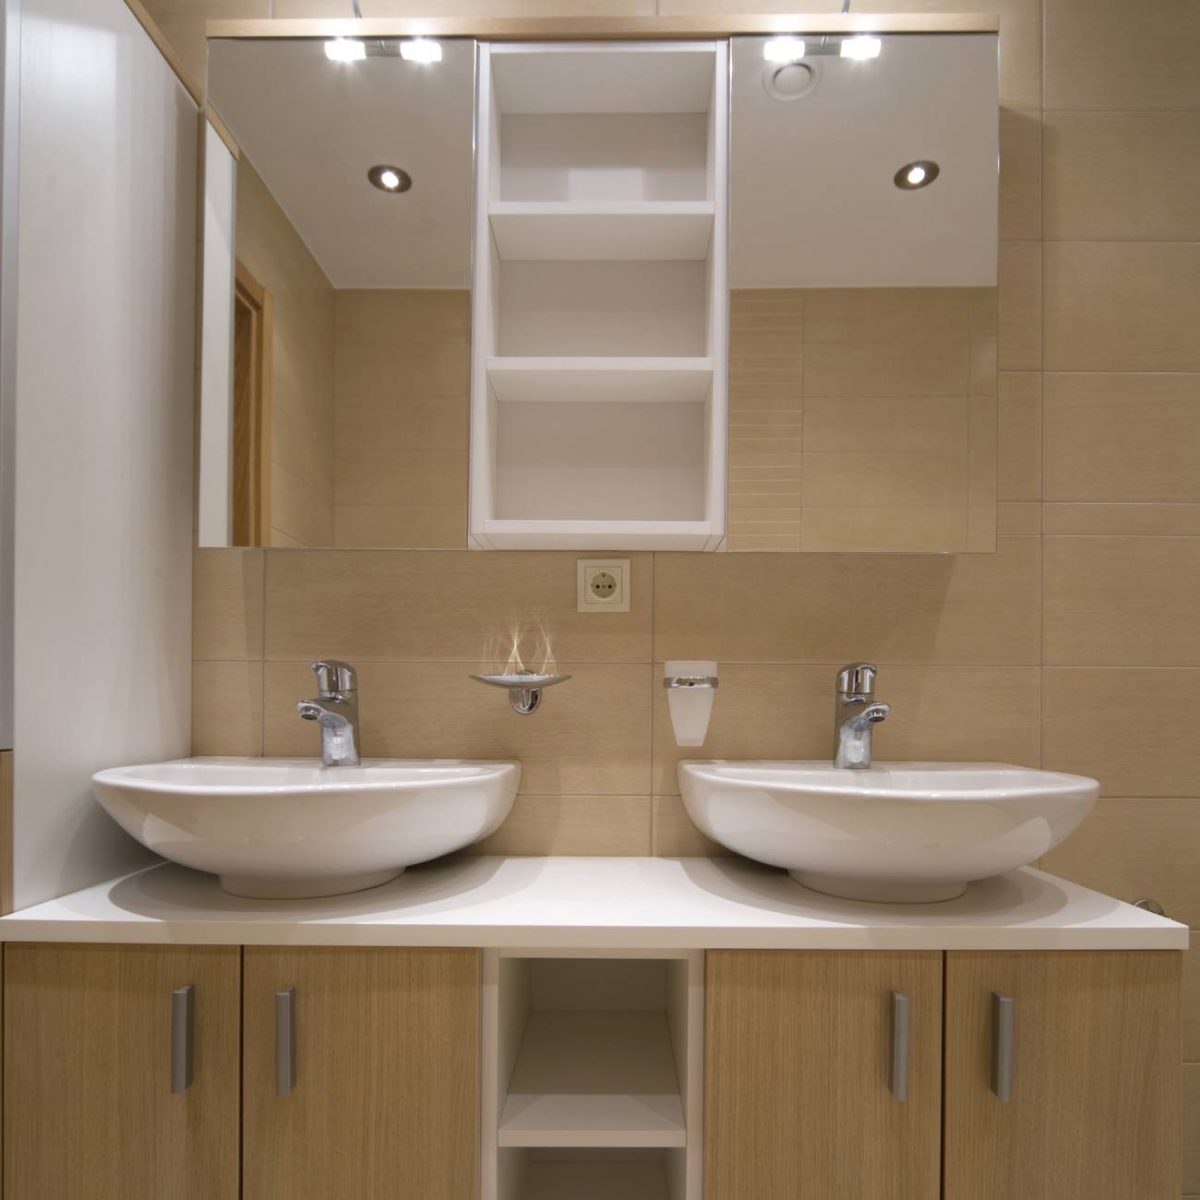 Double vanity with white sinks against tan walls